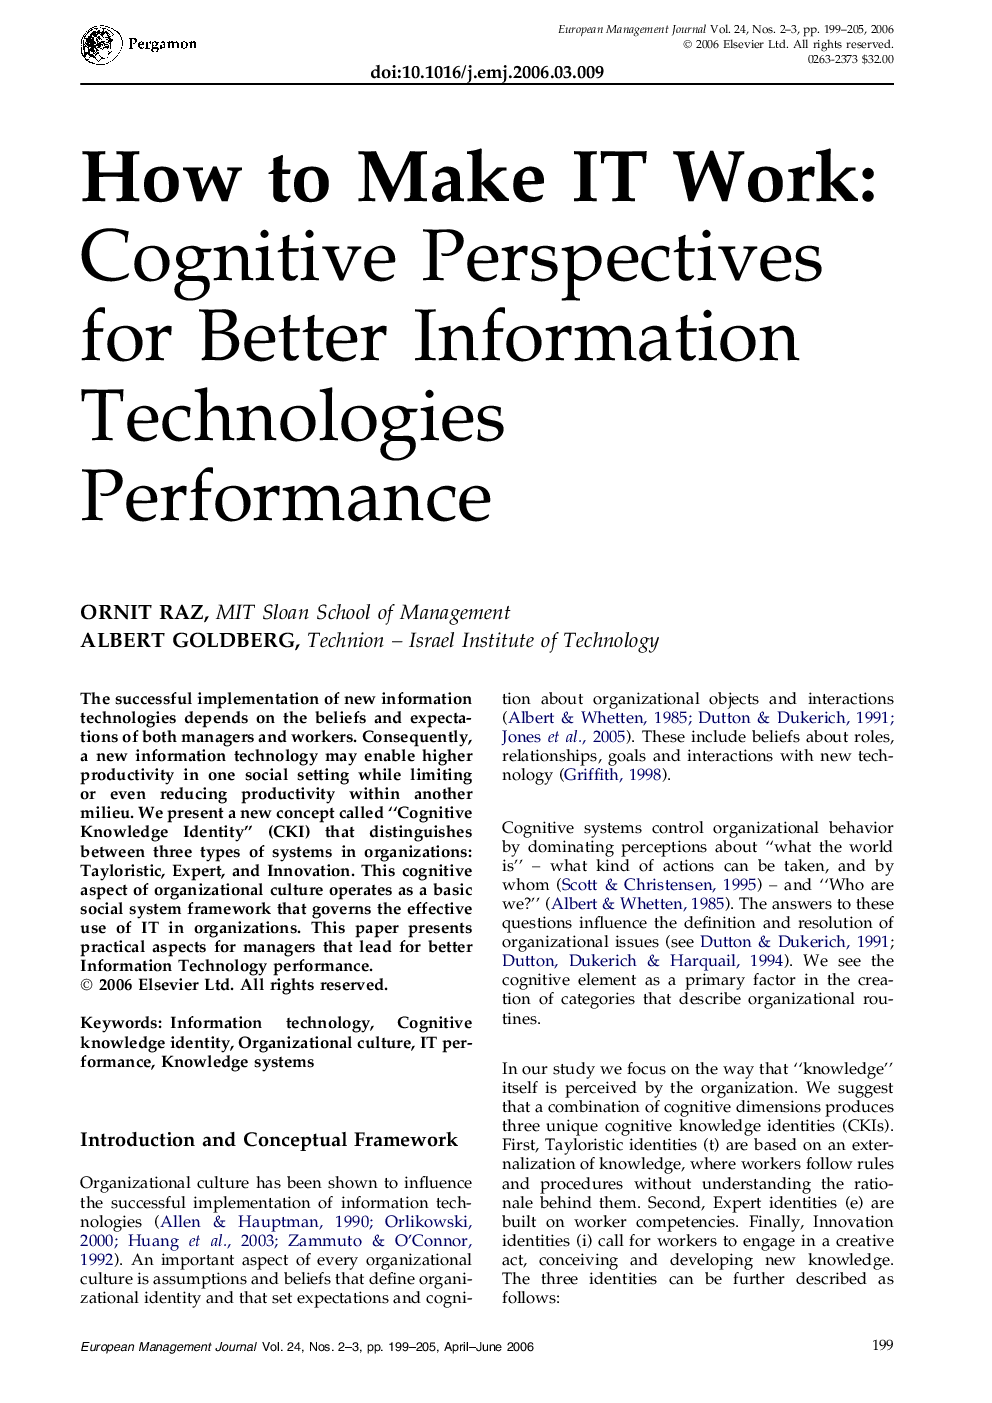 How to Make IT Work:: Cognitive Perspectives for Better Information Technologies Performance